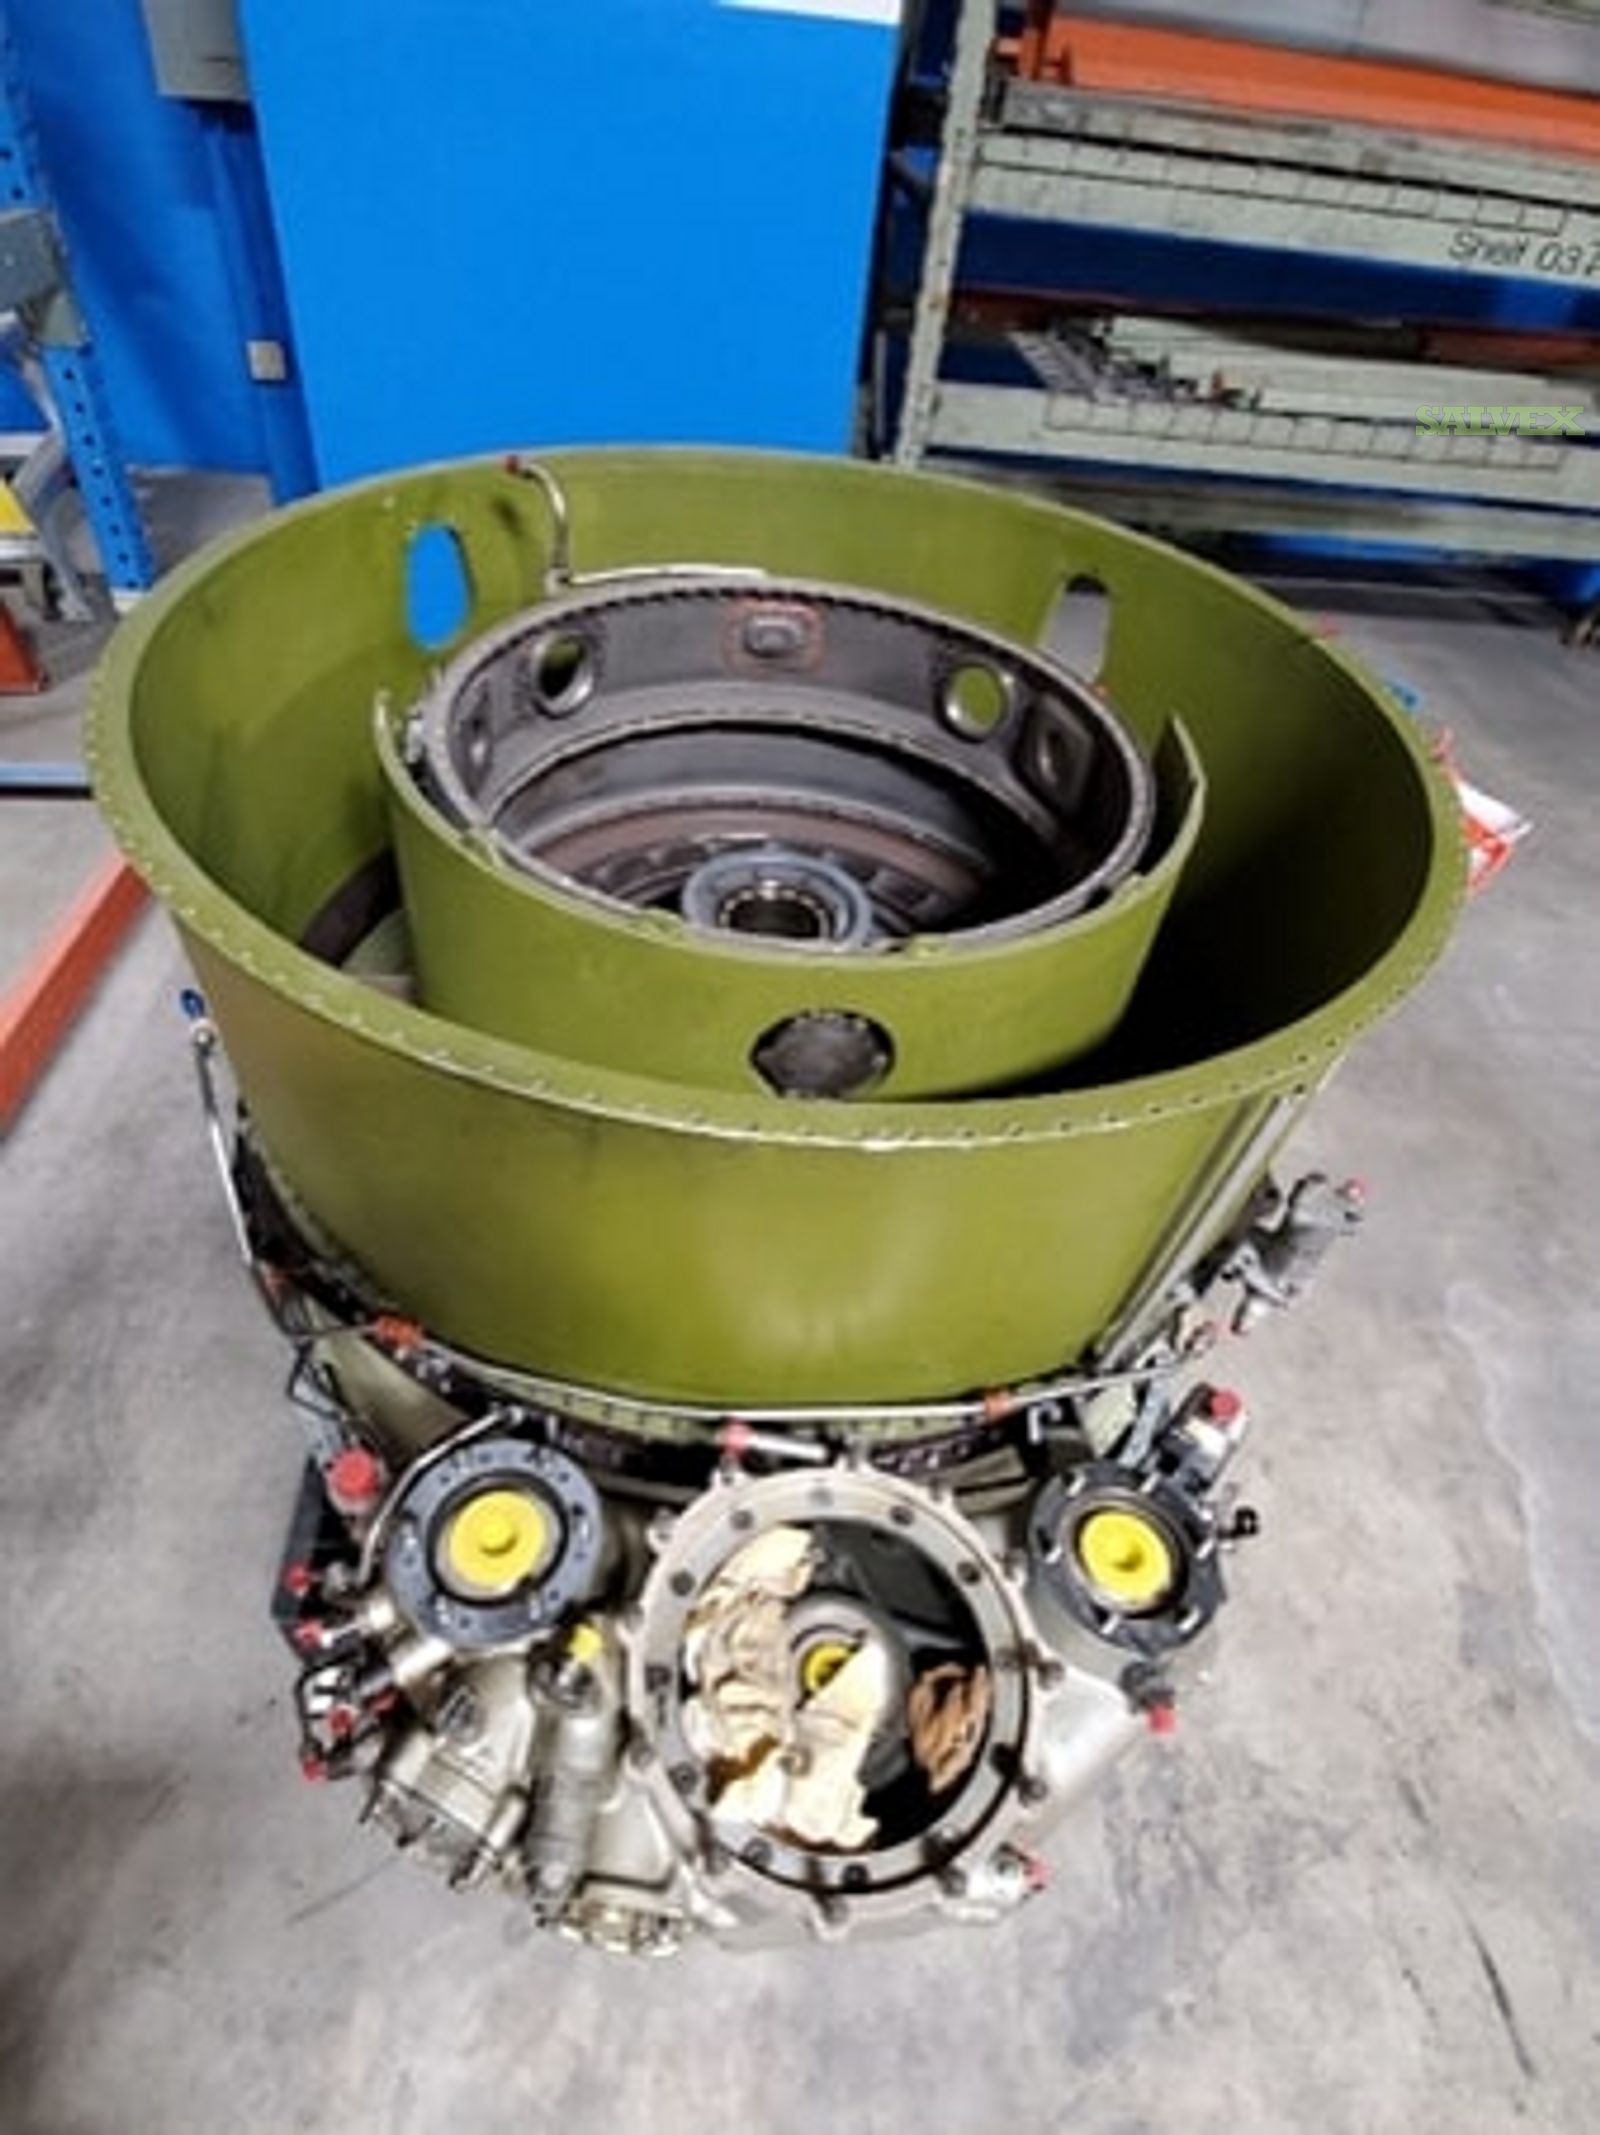 JT8D-219 Engine Parts in SV Condition (277 Parts)